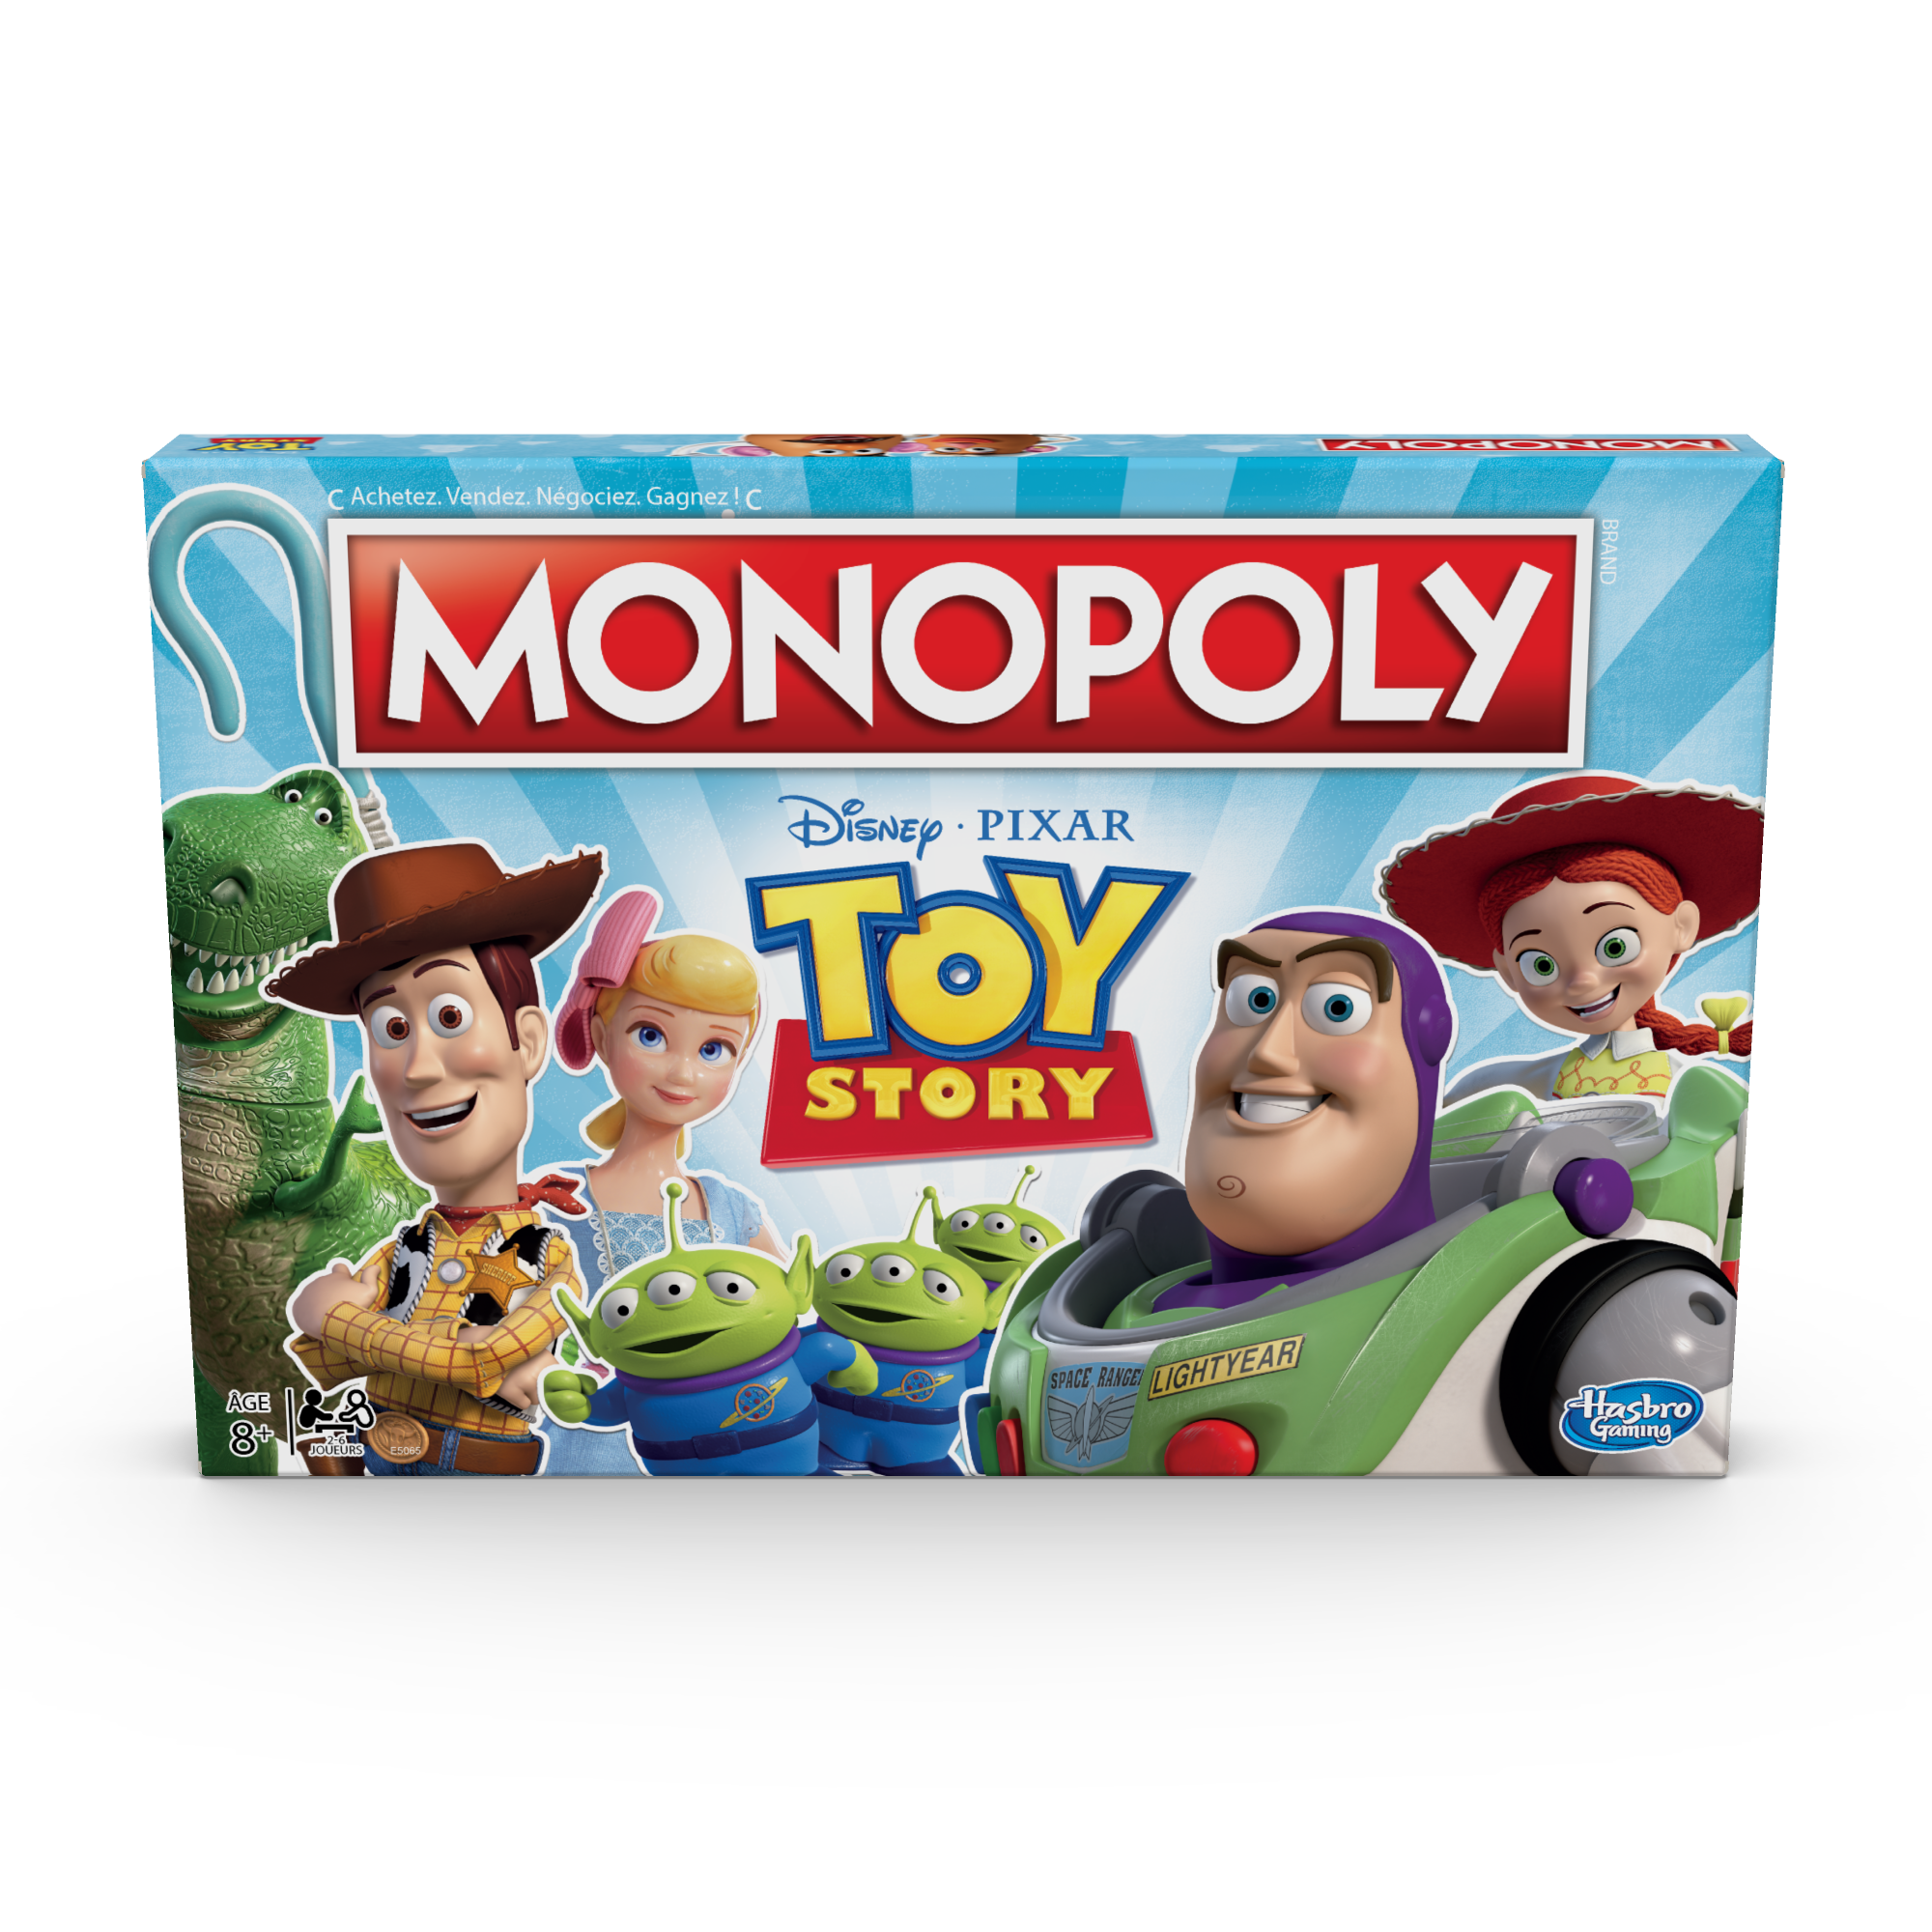 Monopoly Toy Story packaging.tif